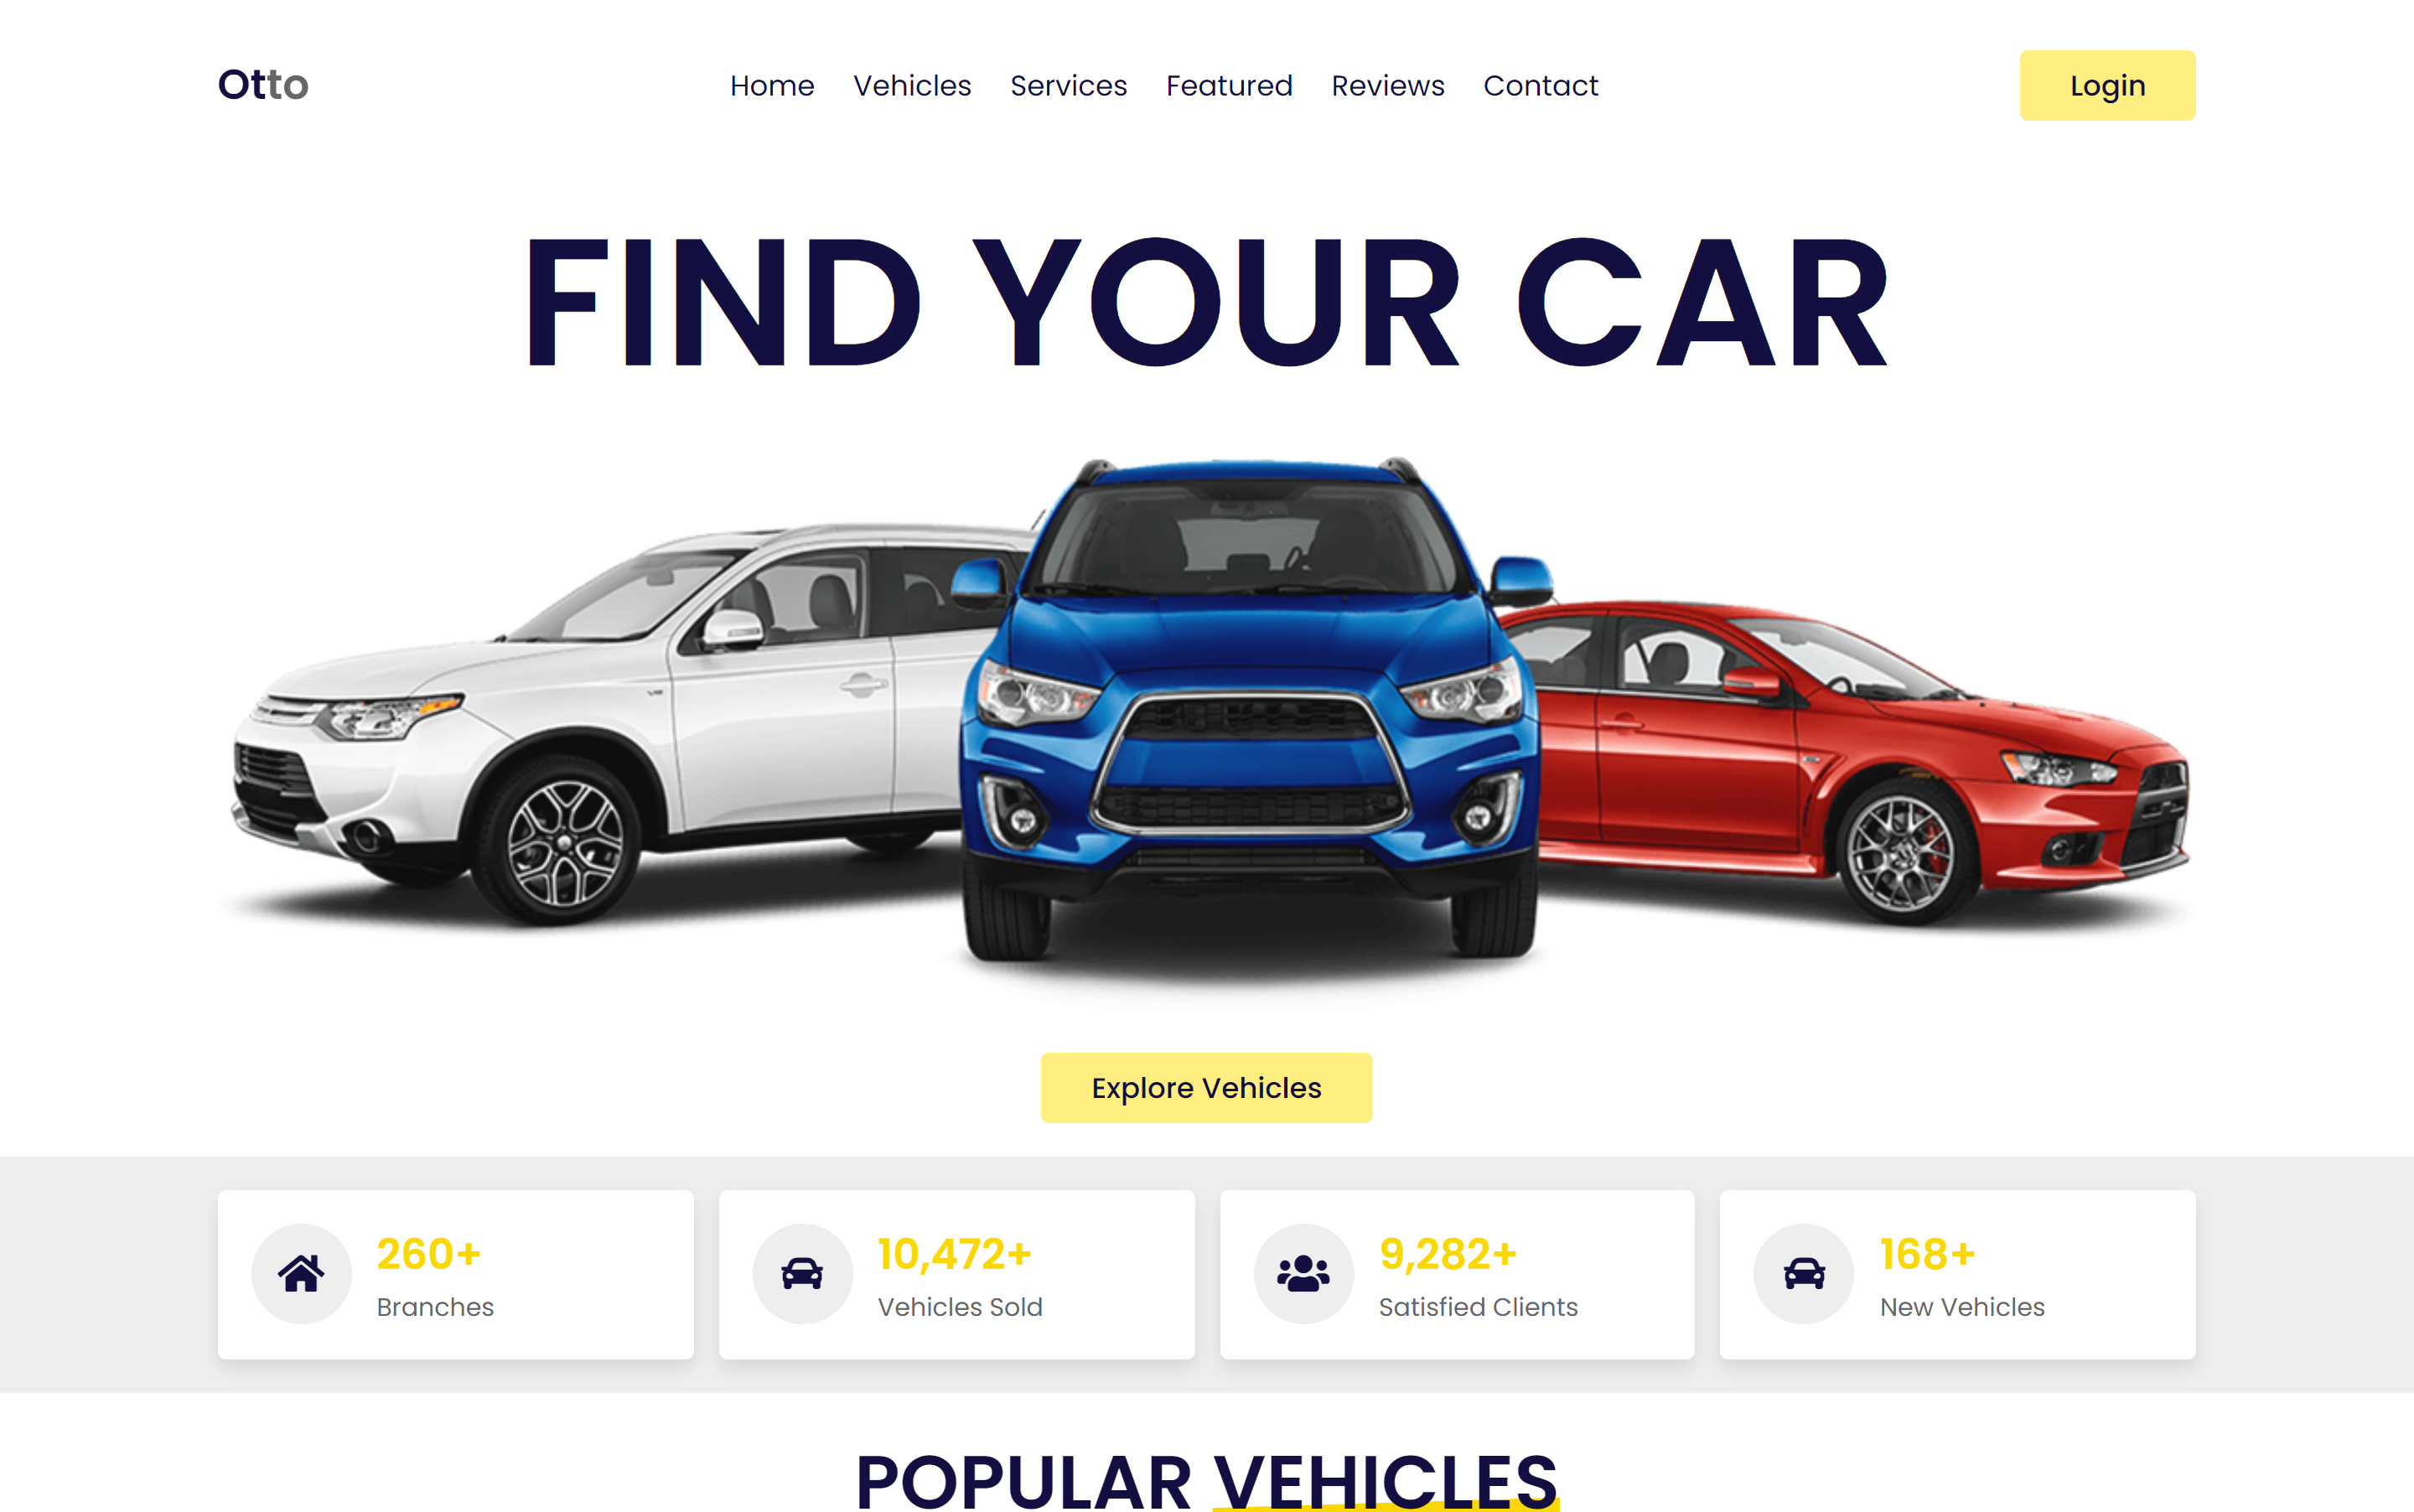 Rent a Vehicle - Landing Page